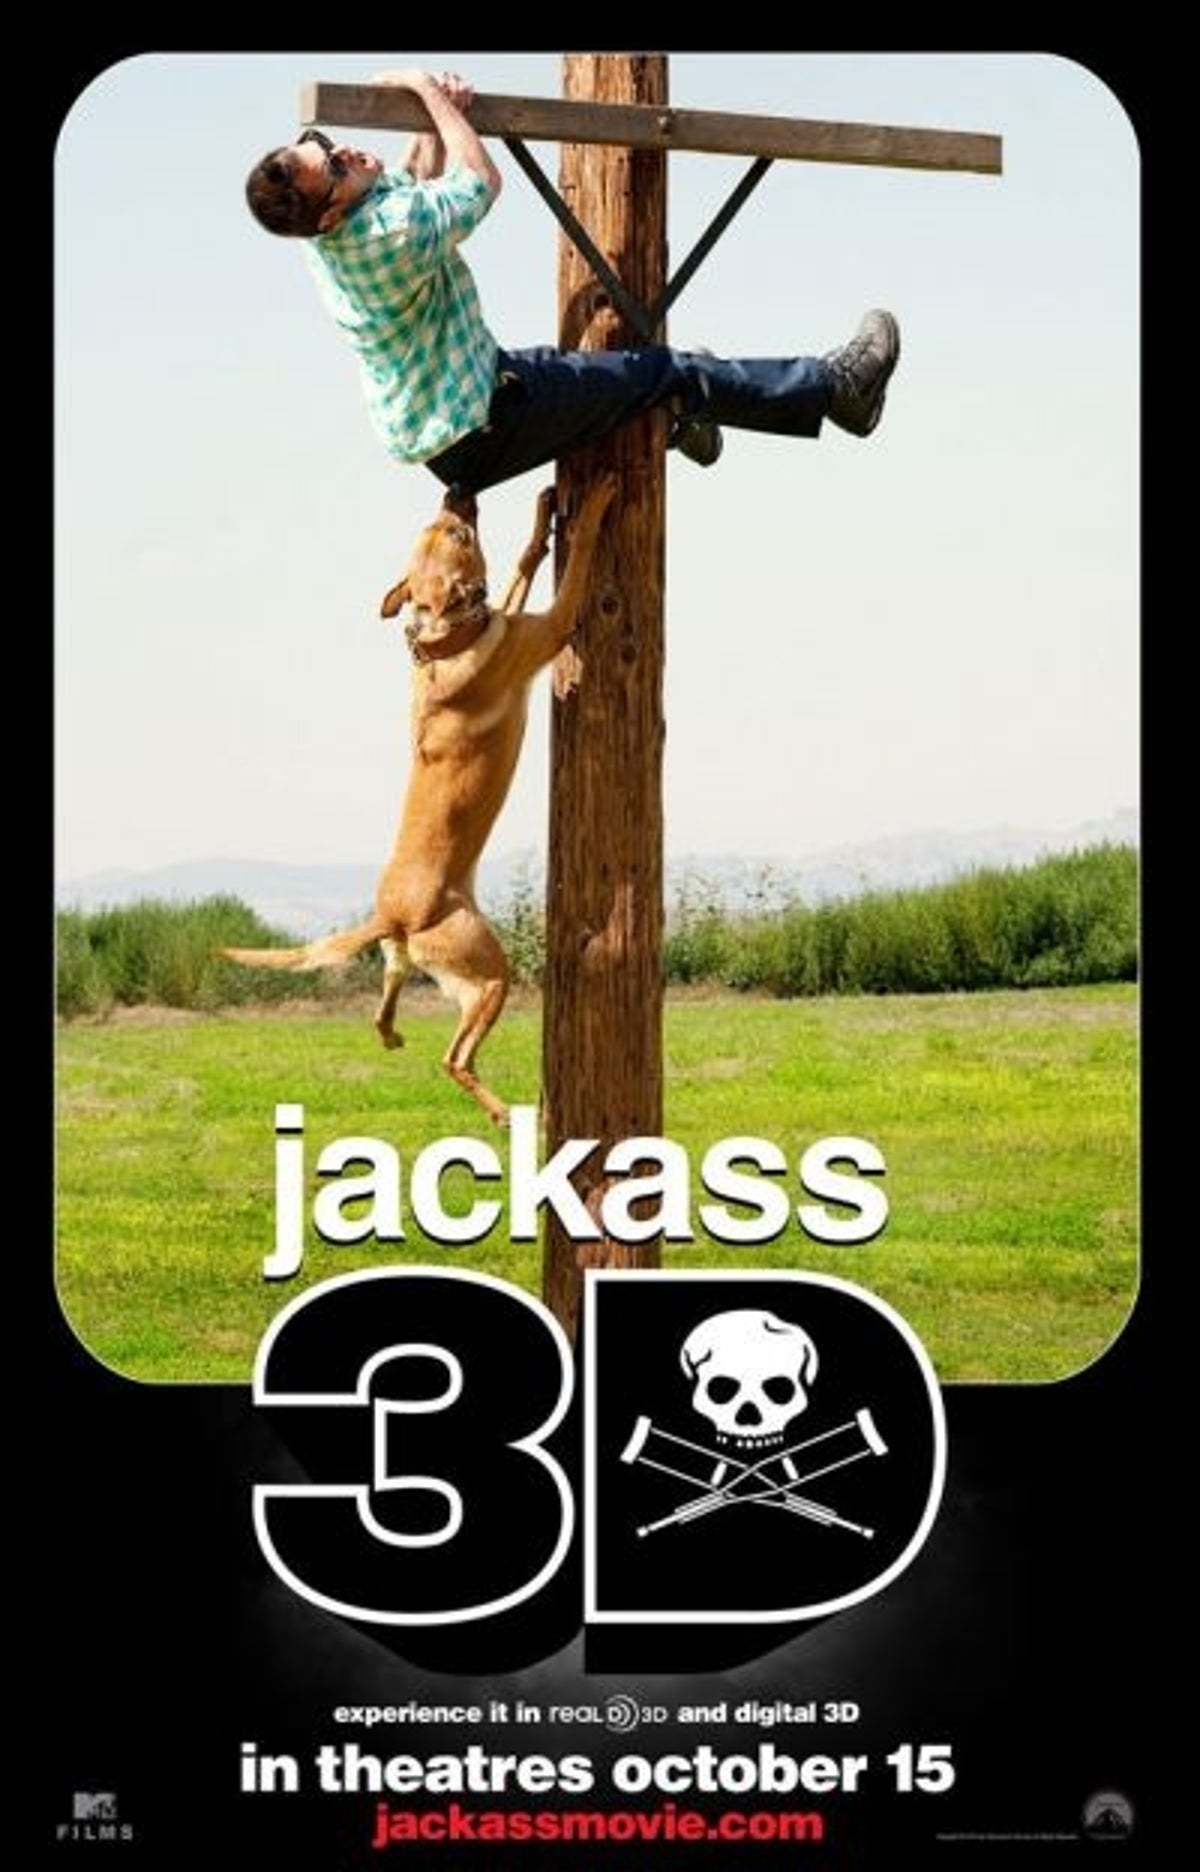 Stunt show 'Jackass' in 3D tackles box office | The Independent | The  Independent